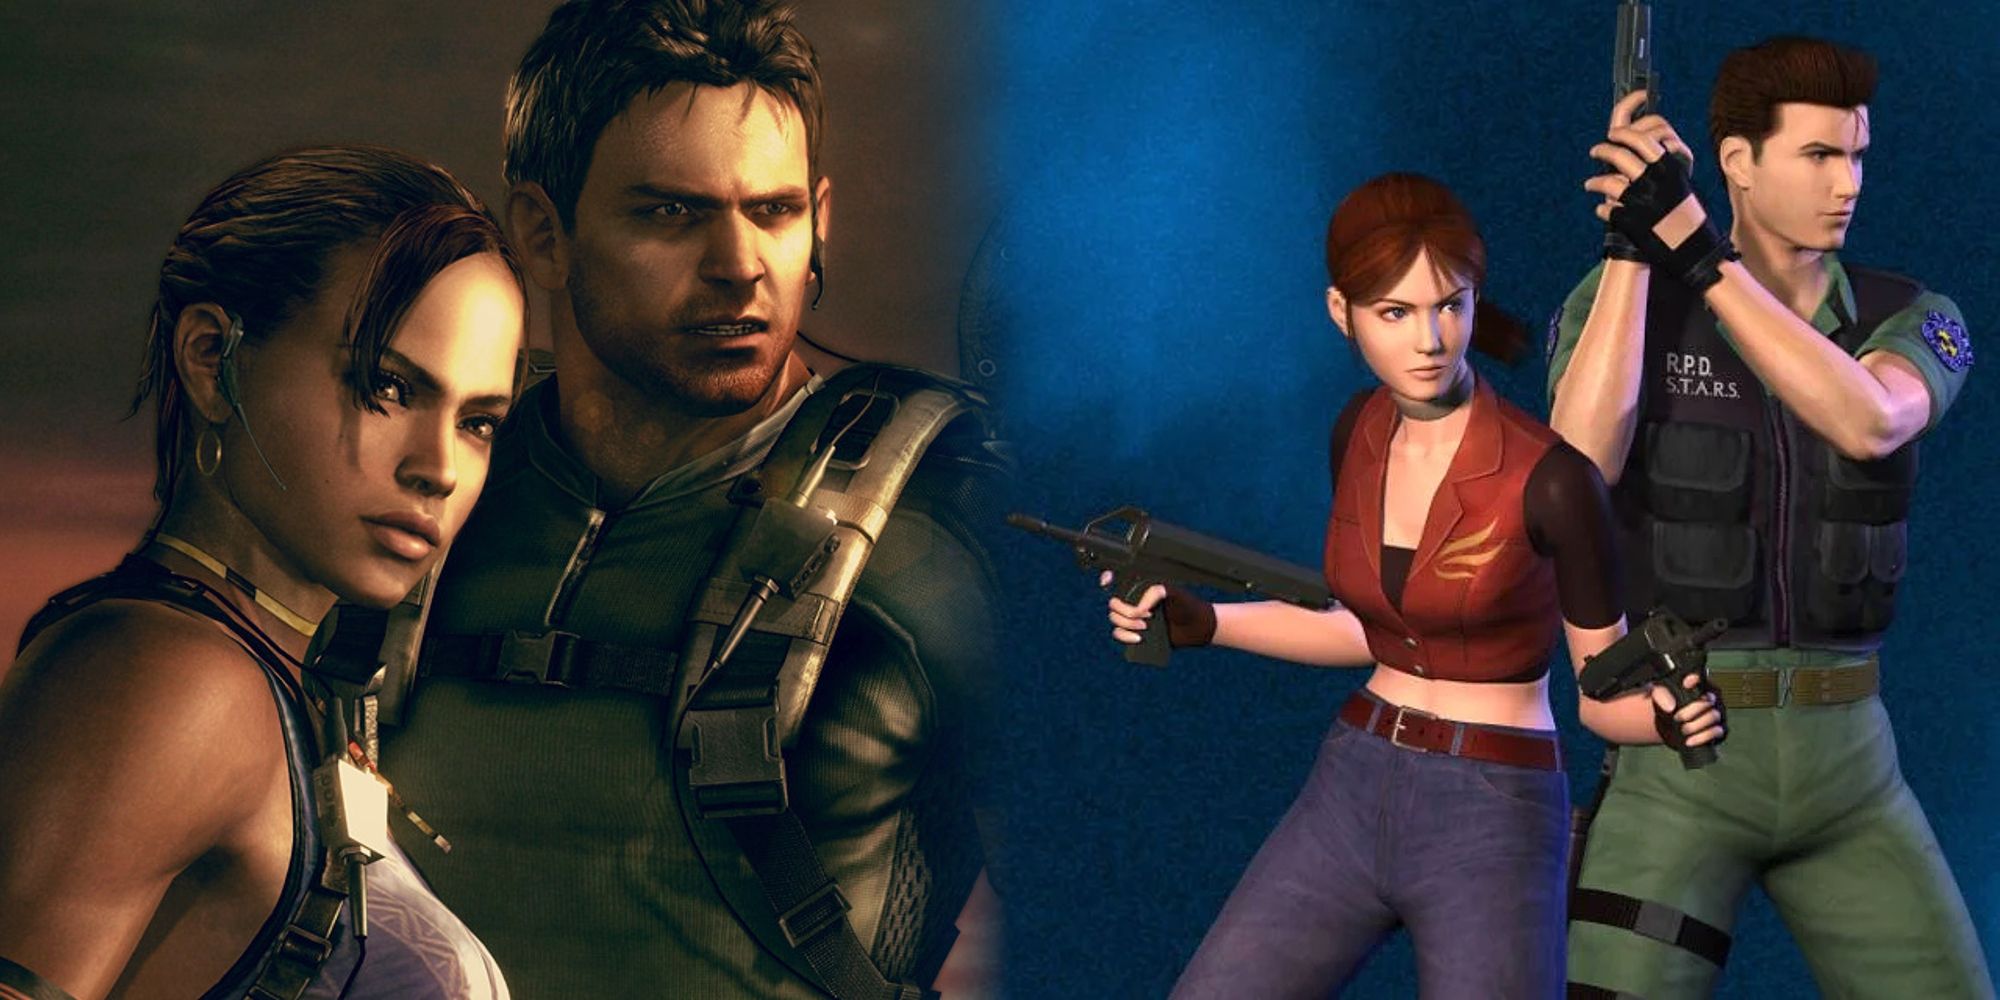 Chris and Sheva from Resident Evil 5 pictured next to Claire and Chris from Code Veronica.